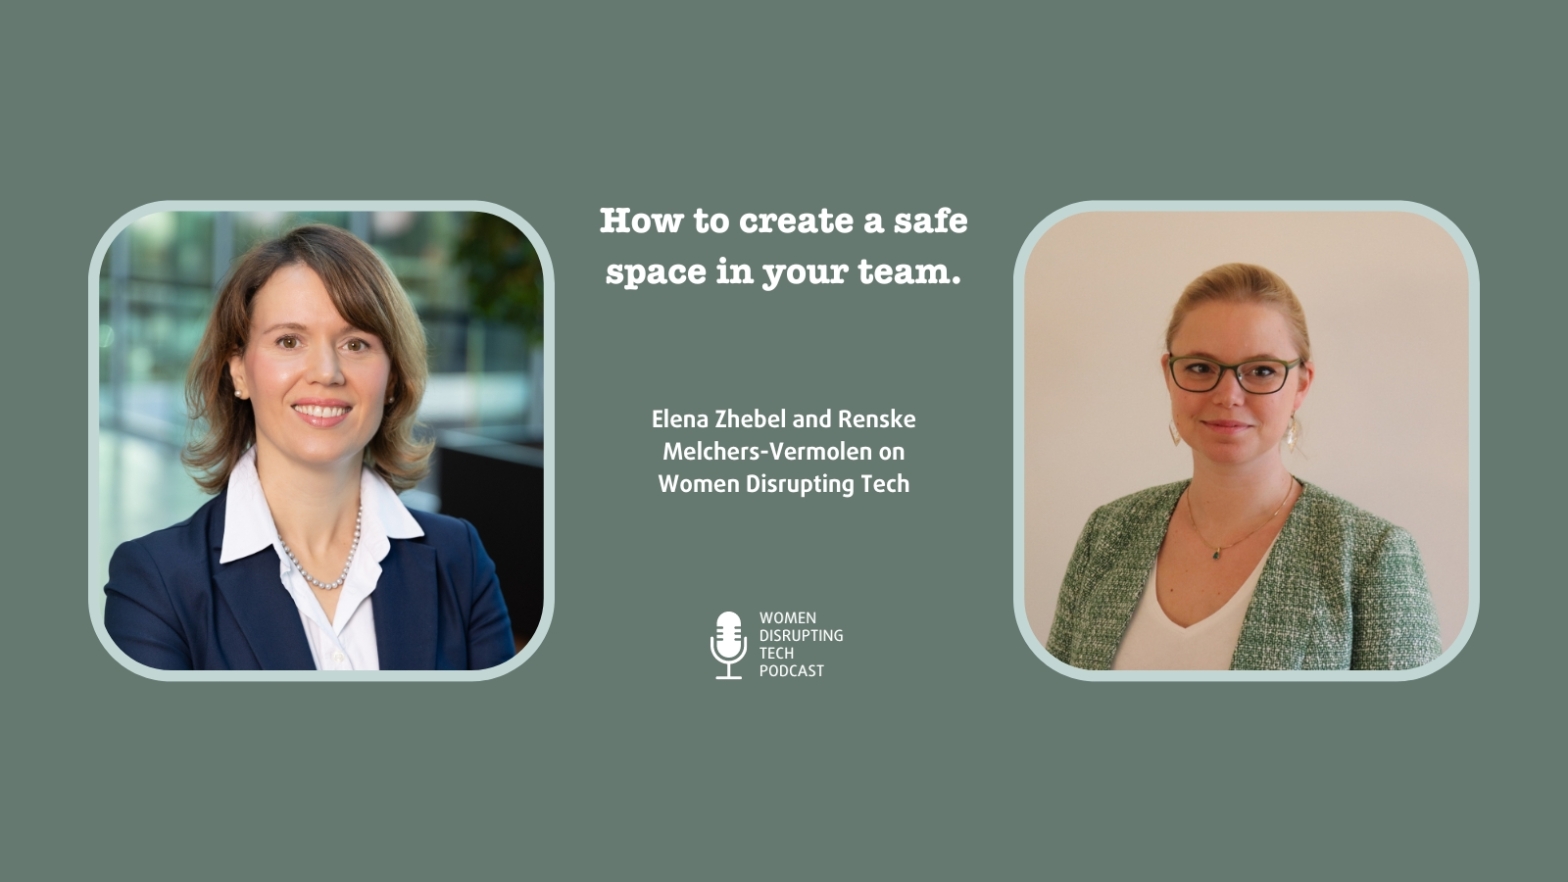 Pictures of Elena Zhebel and Renske Melchers-Vermolen with a quote from episode 42 of the Women Disrupting Tech podcast titled 'How to Create a Safe Space in Your Team." Go to the blog to listen or search for "Women Disrupting Tech" in your favorite podcast player.